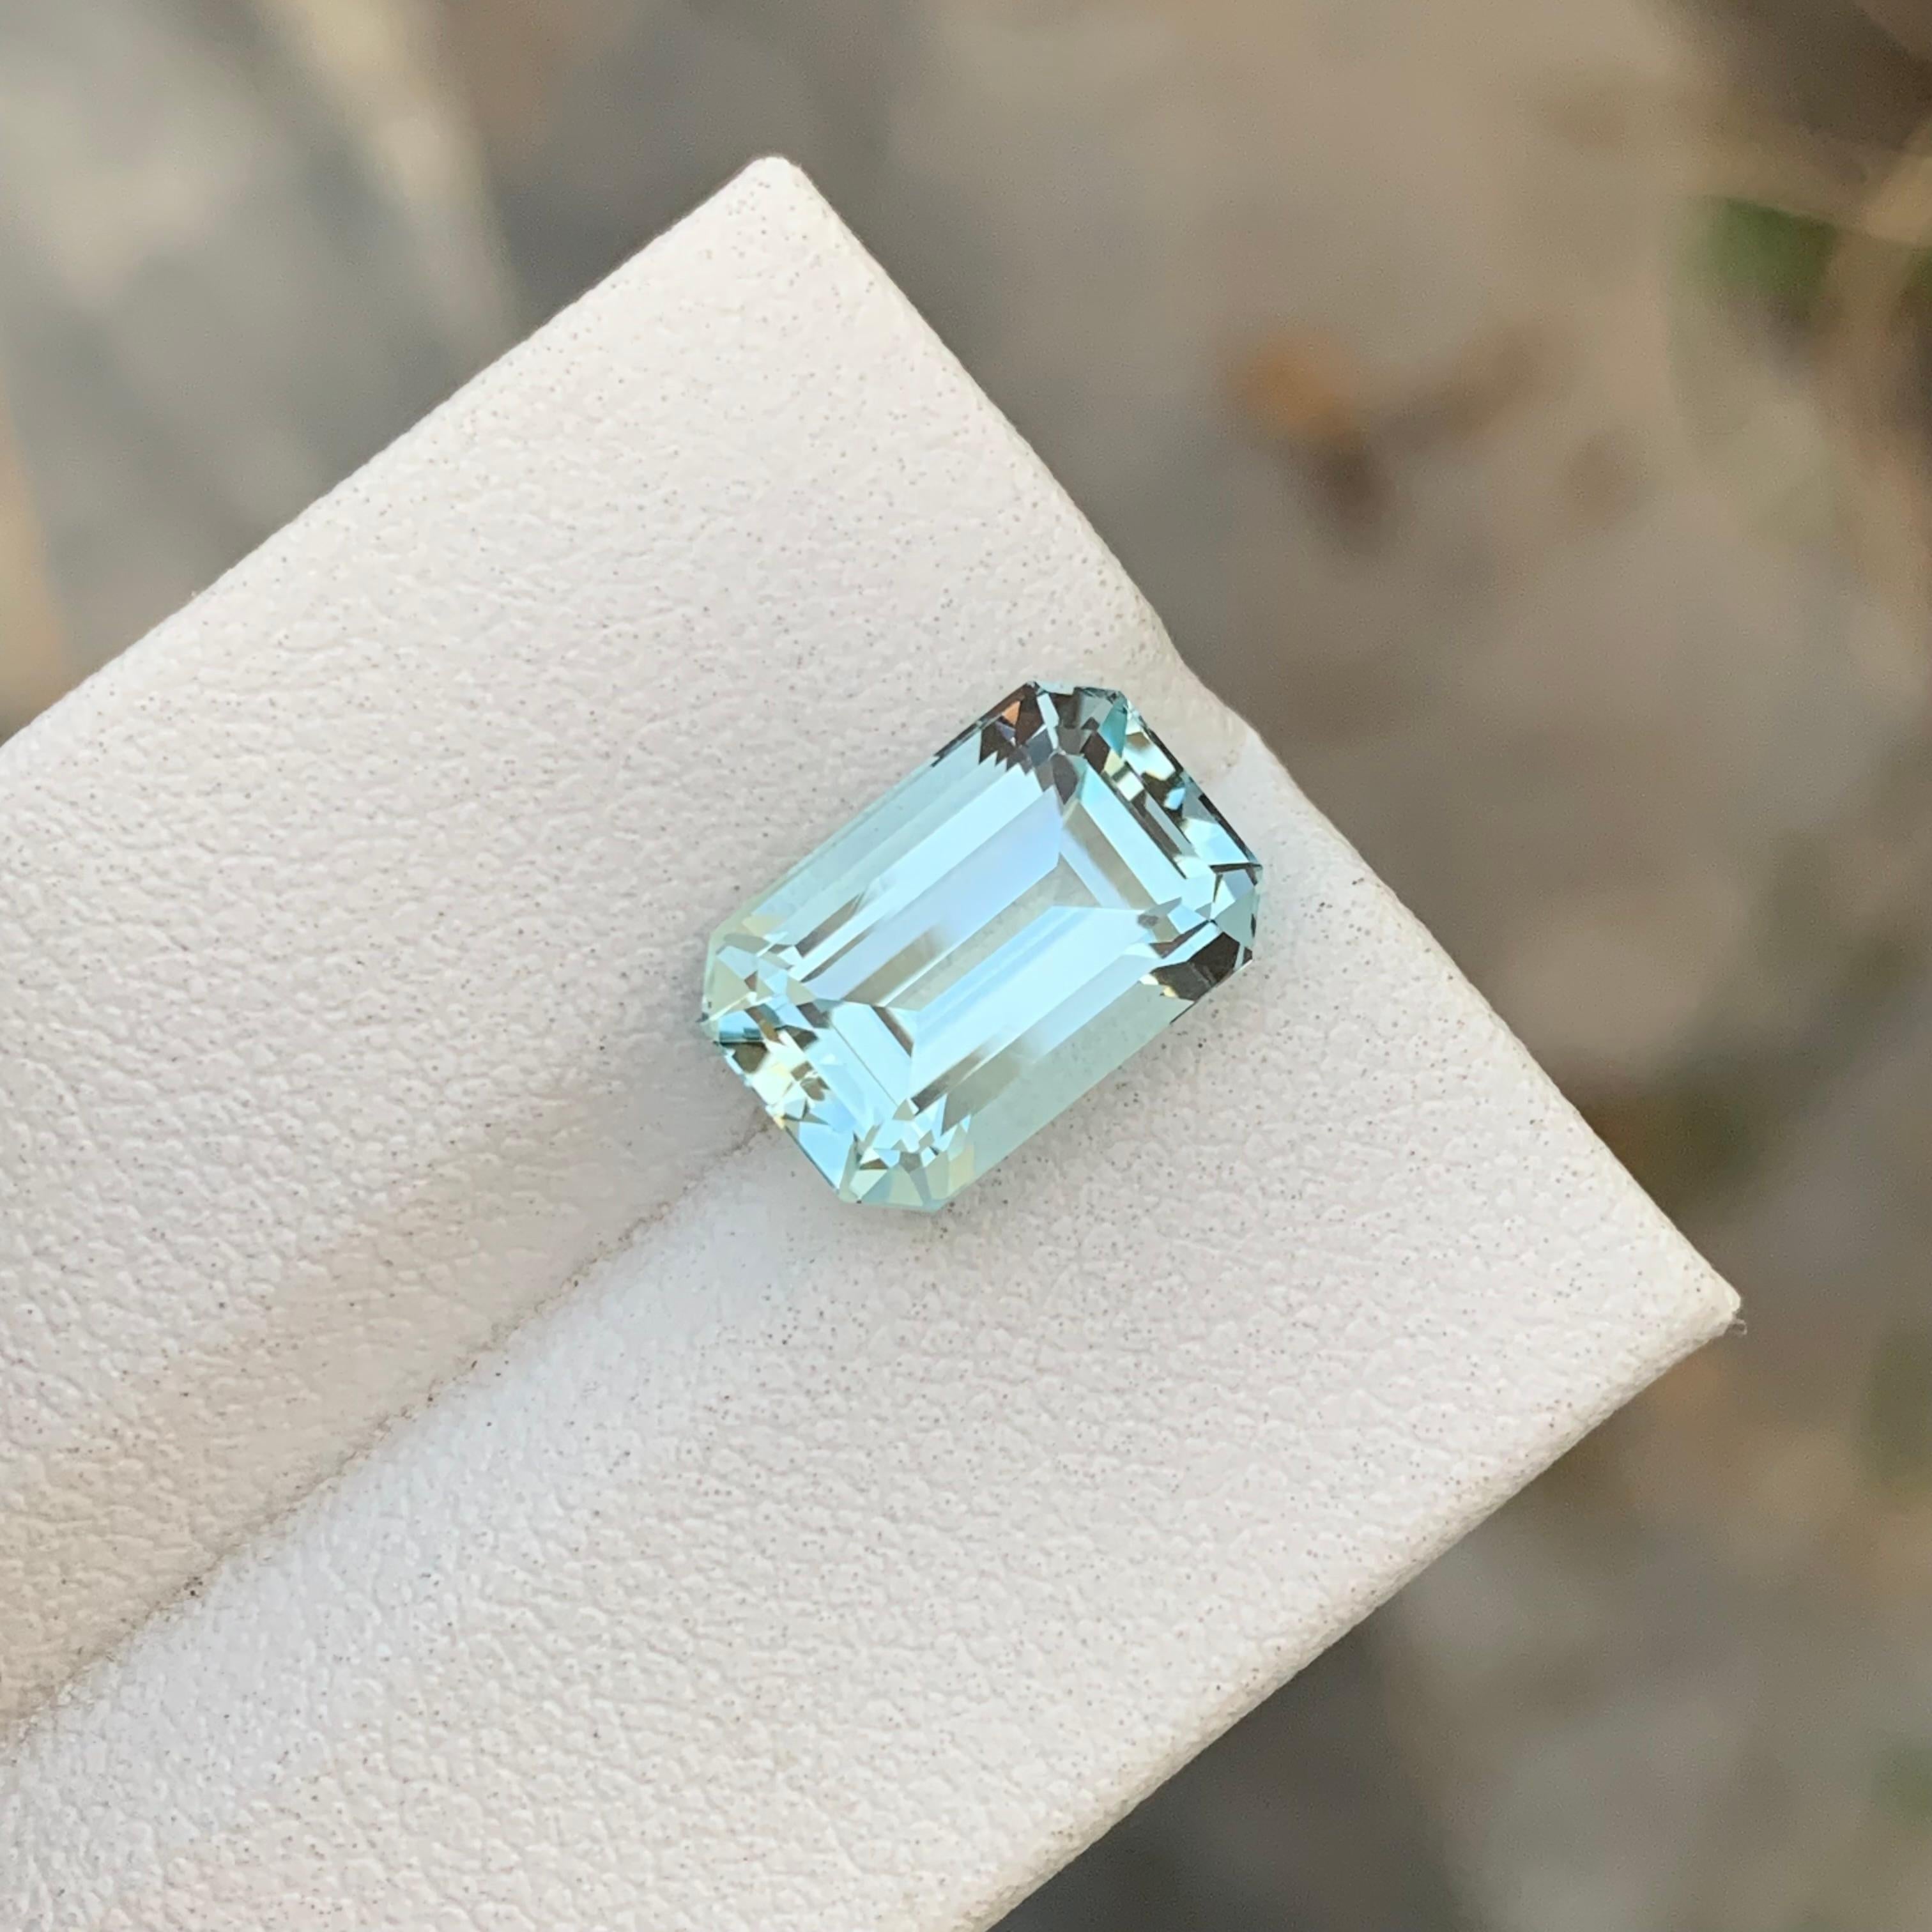 Loose Aquamarine
Weight: 3.80 Carat
Dimension: 11.3 x 7.5 x 6.2 Mm
Colour : Pale Blue
Origin: Shigar Valley, Pakistan
Treatment: Non
Certificate : On Demand
Shape: Emerald 

Aquamarine is a captivating gemstone known for its enchanting blue-green